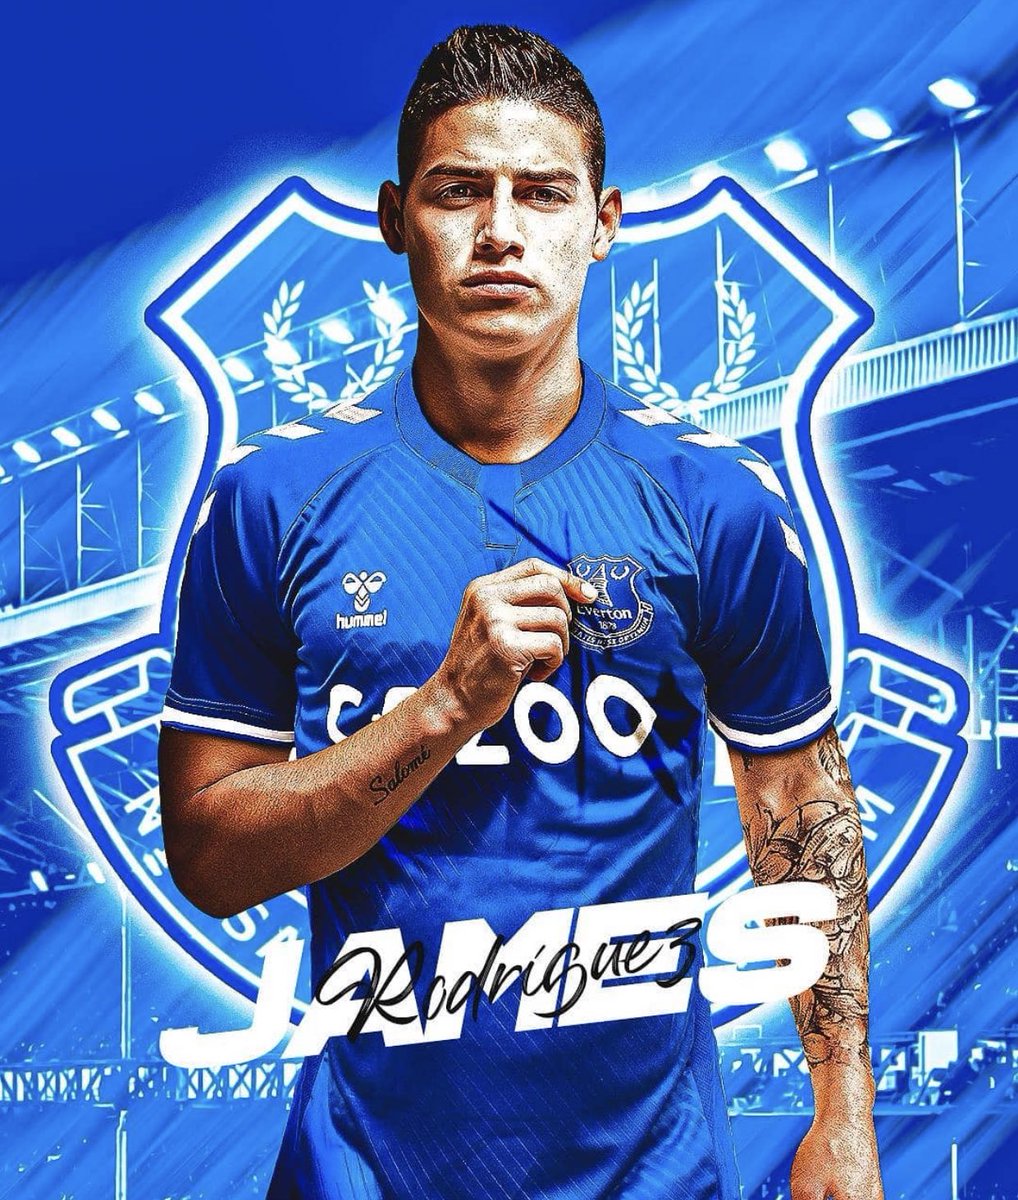 10. James RodriguezFee: About 30 millionHe was the master of his own dropoff so he can pick himself back up as well. His relationship with Carlo Ancelotti may be the key to doing that. A loss of form will never mean a loss of quality so overall a good Everton signing.